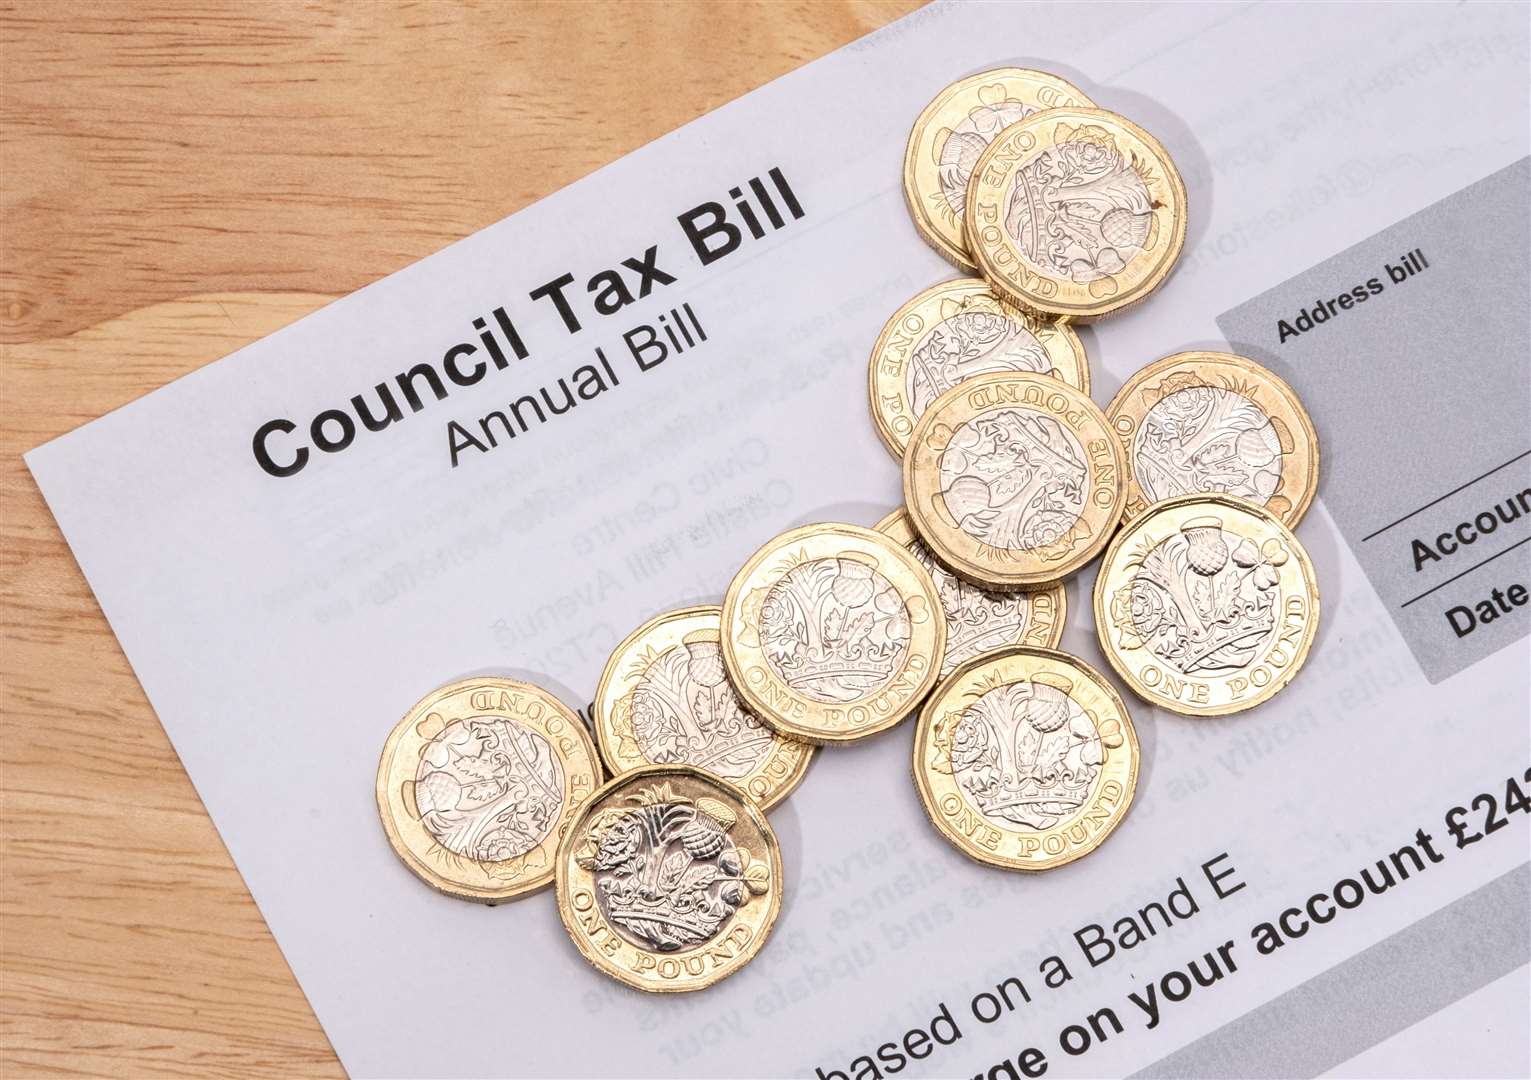 Council tax payments will go up for most households in April. Image: Stock photo.